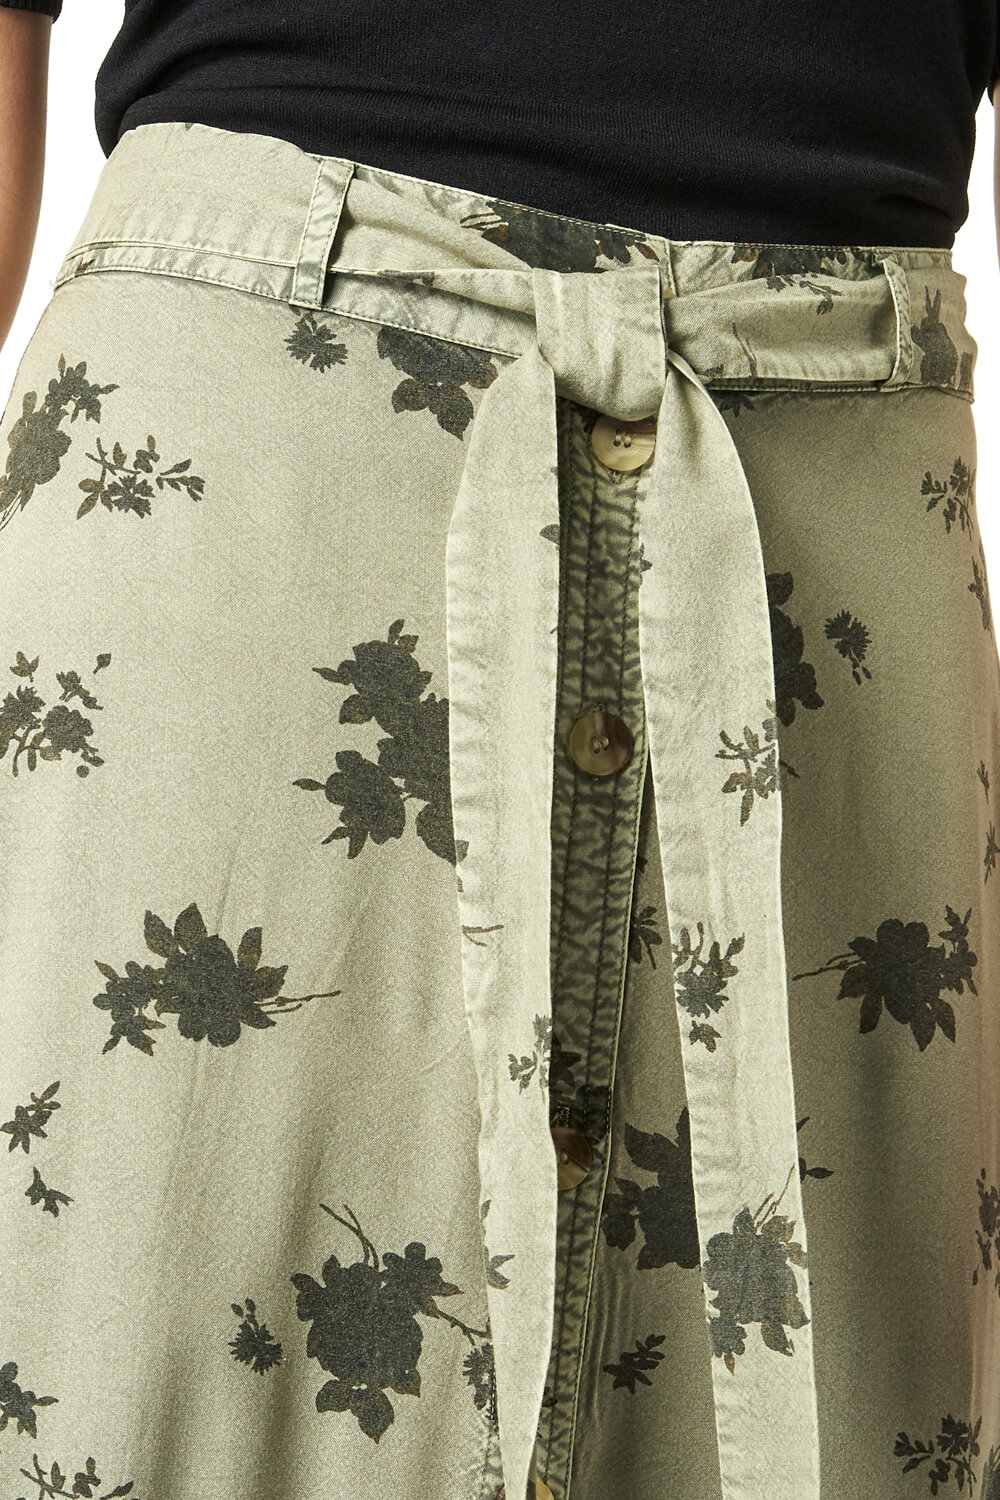 KHAKI Floral Print Button Front Skirt, Image 3 of 5